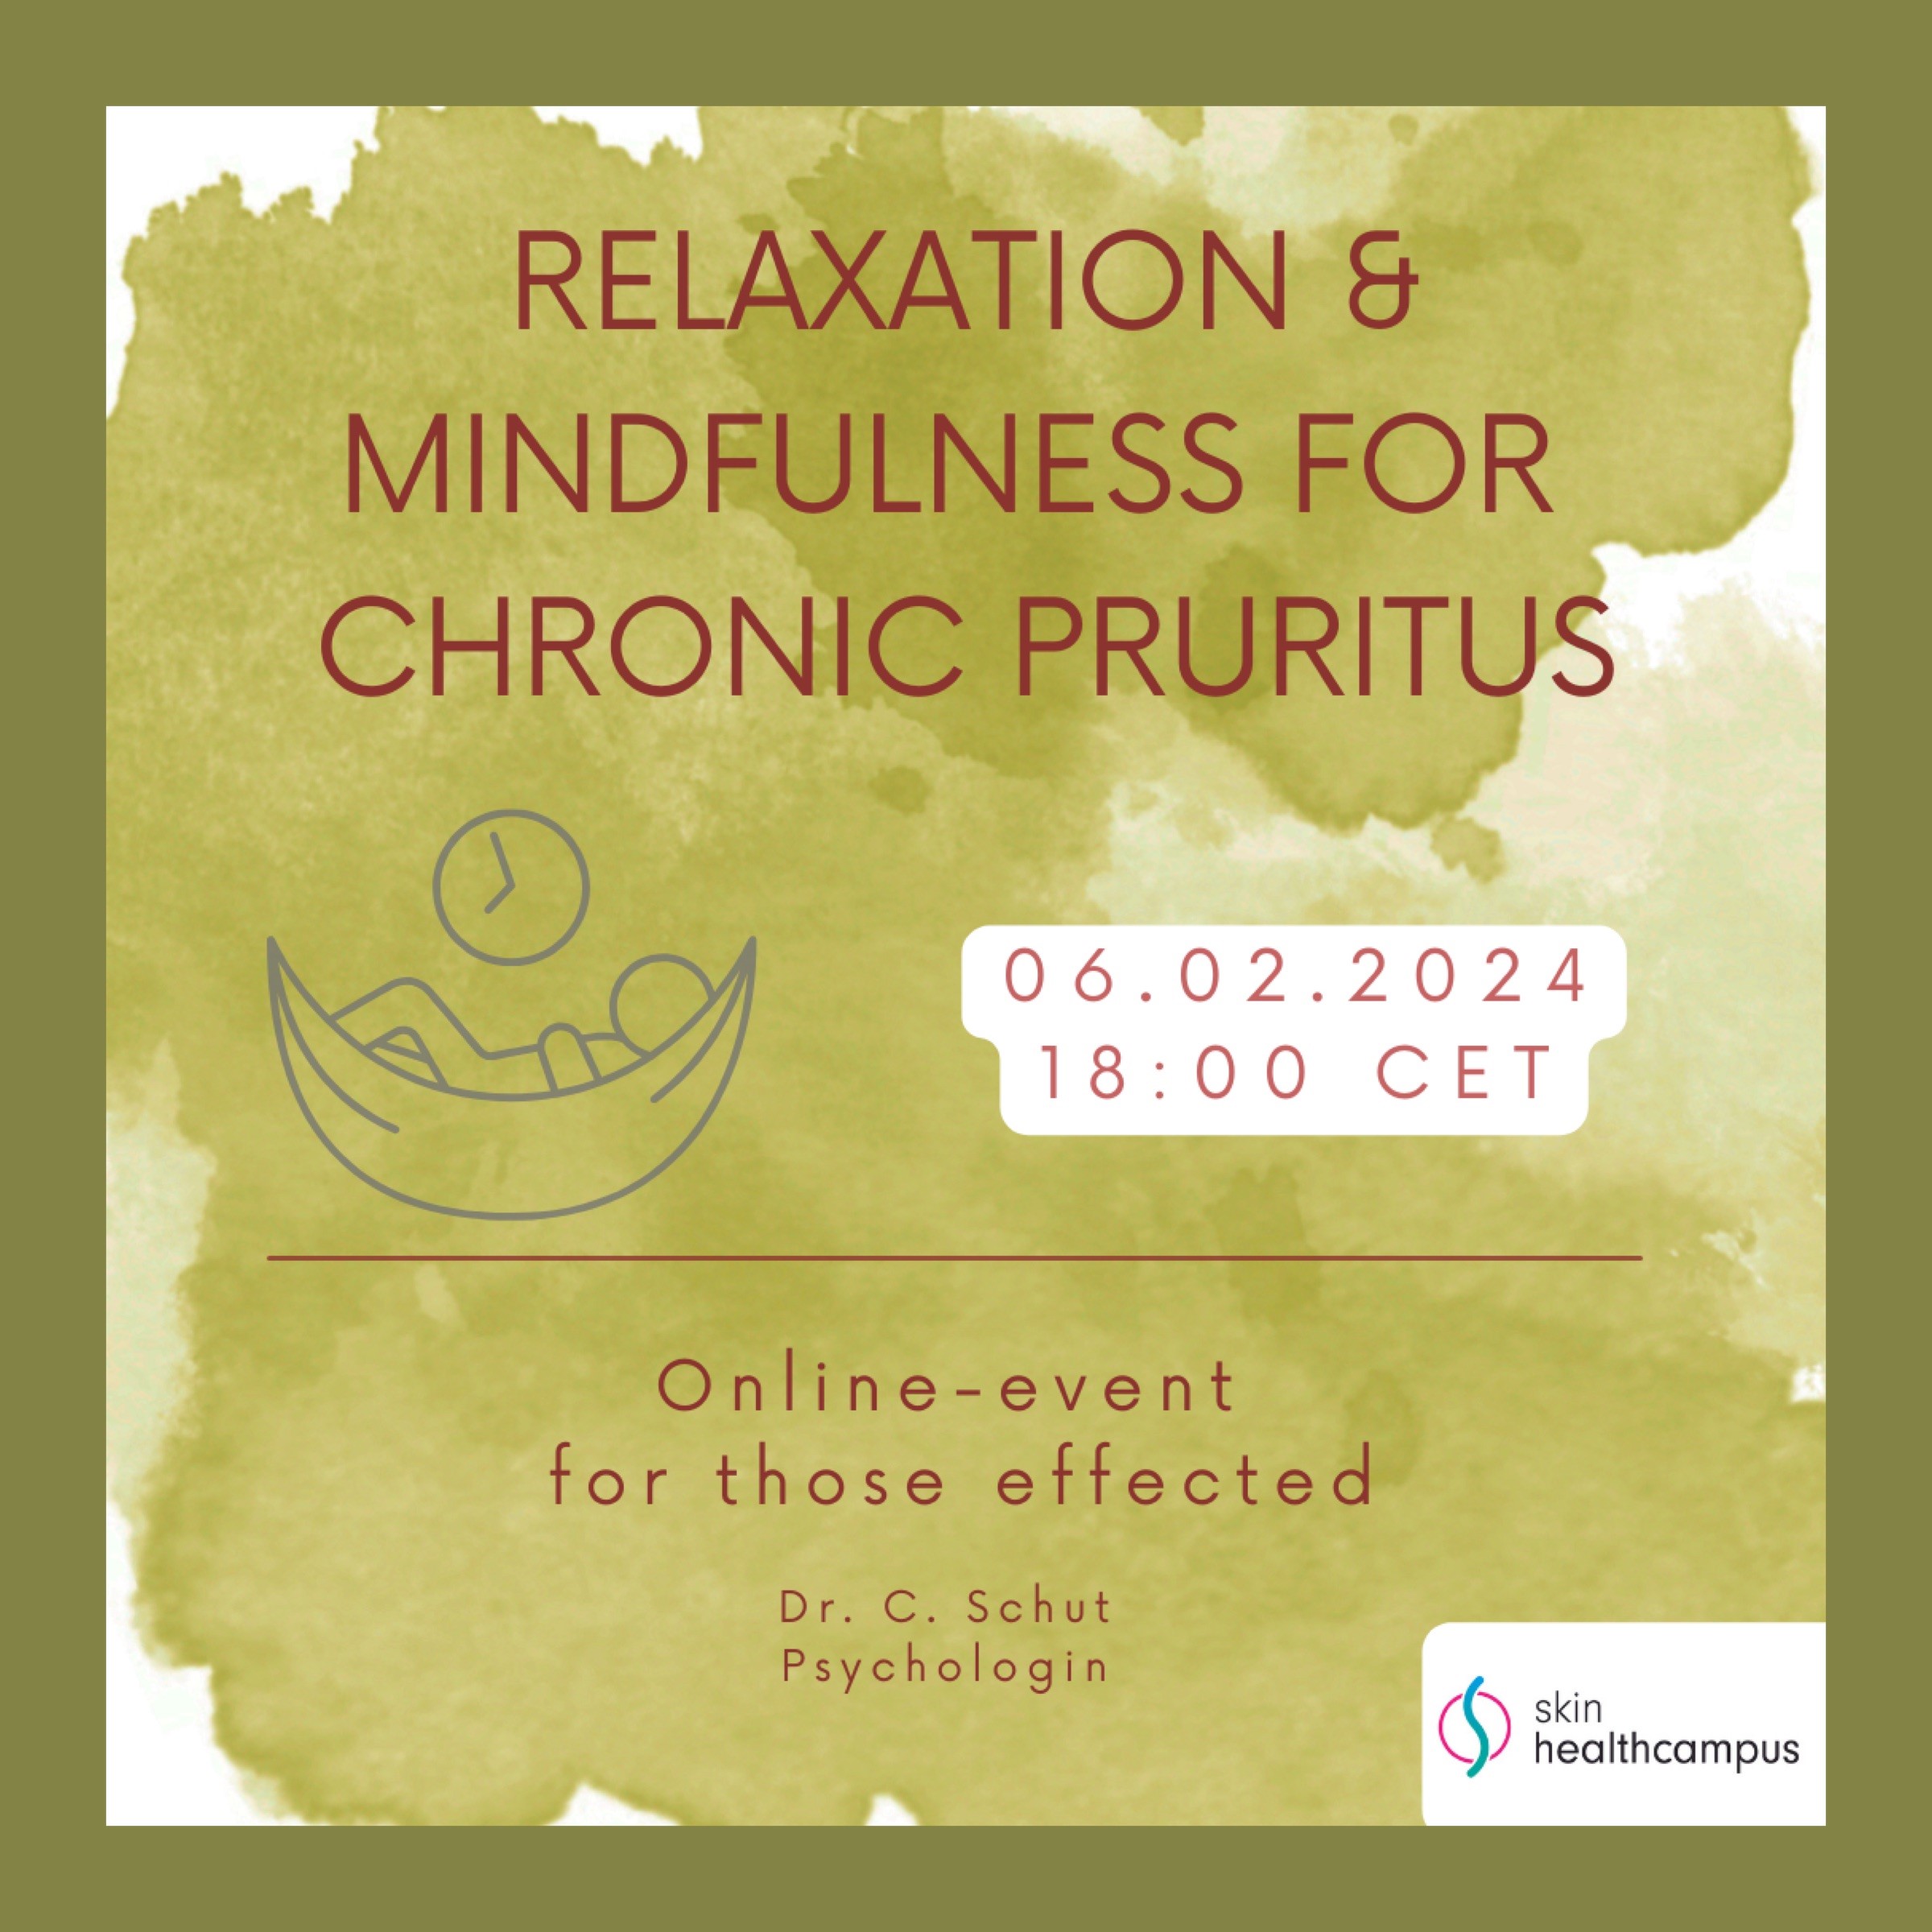 Relaxation techniques and mindfulness for chronic pruritus